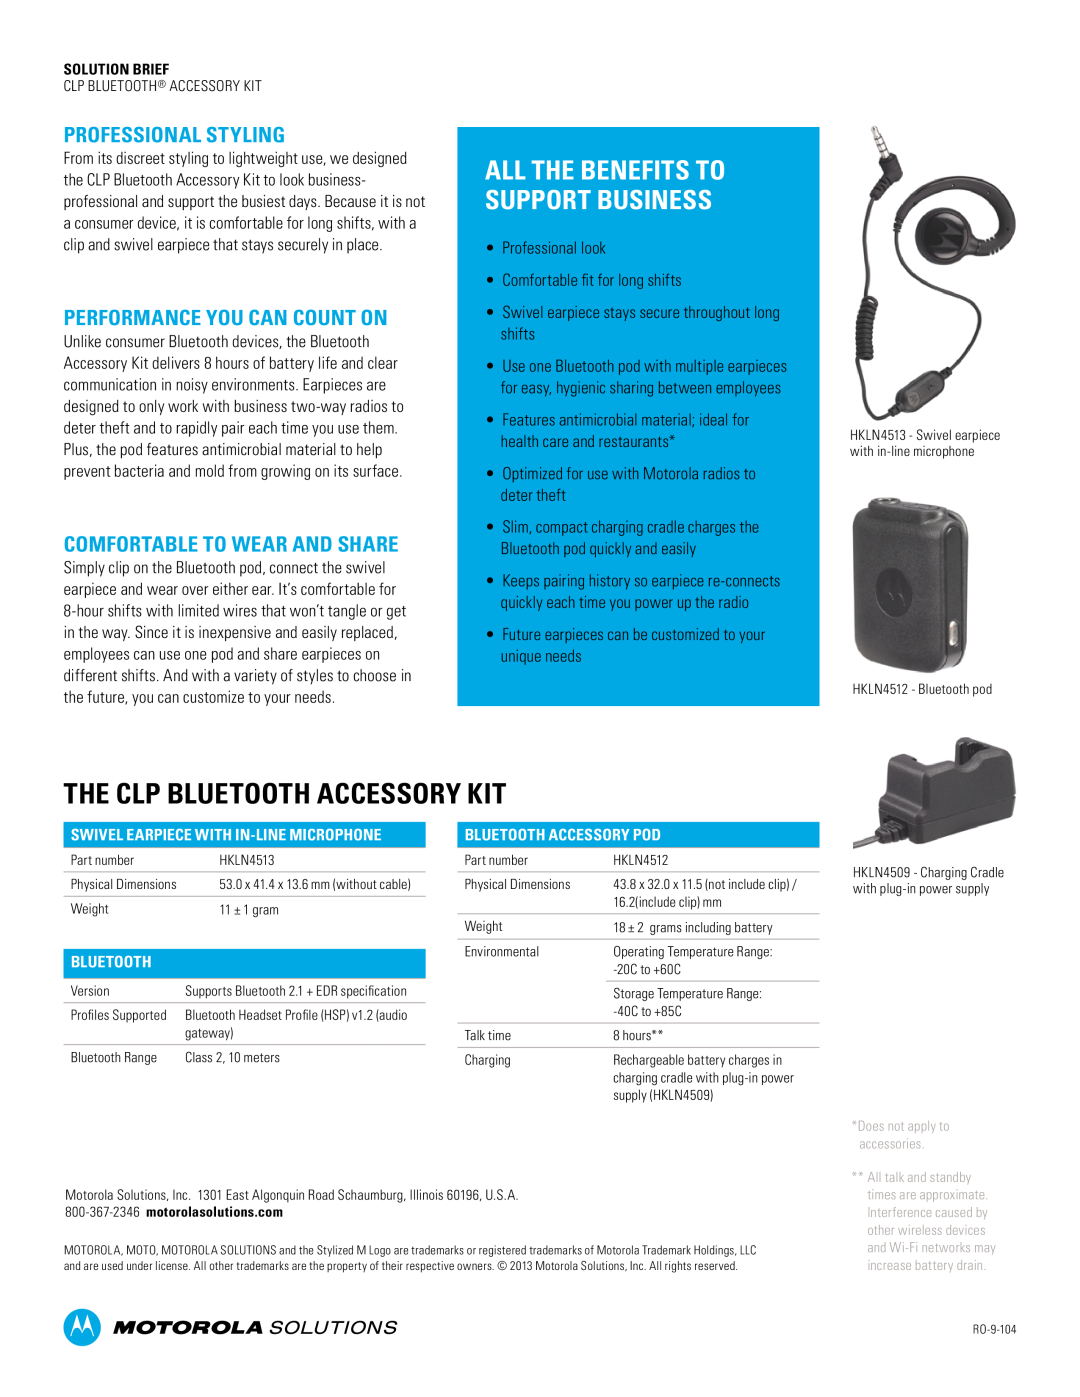 Motorola HKLN4513, HKLN4509 The Clp Bluetooth Accessory Kit, All The Benefits To Support Business, Professional Styling 